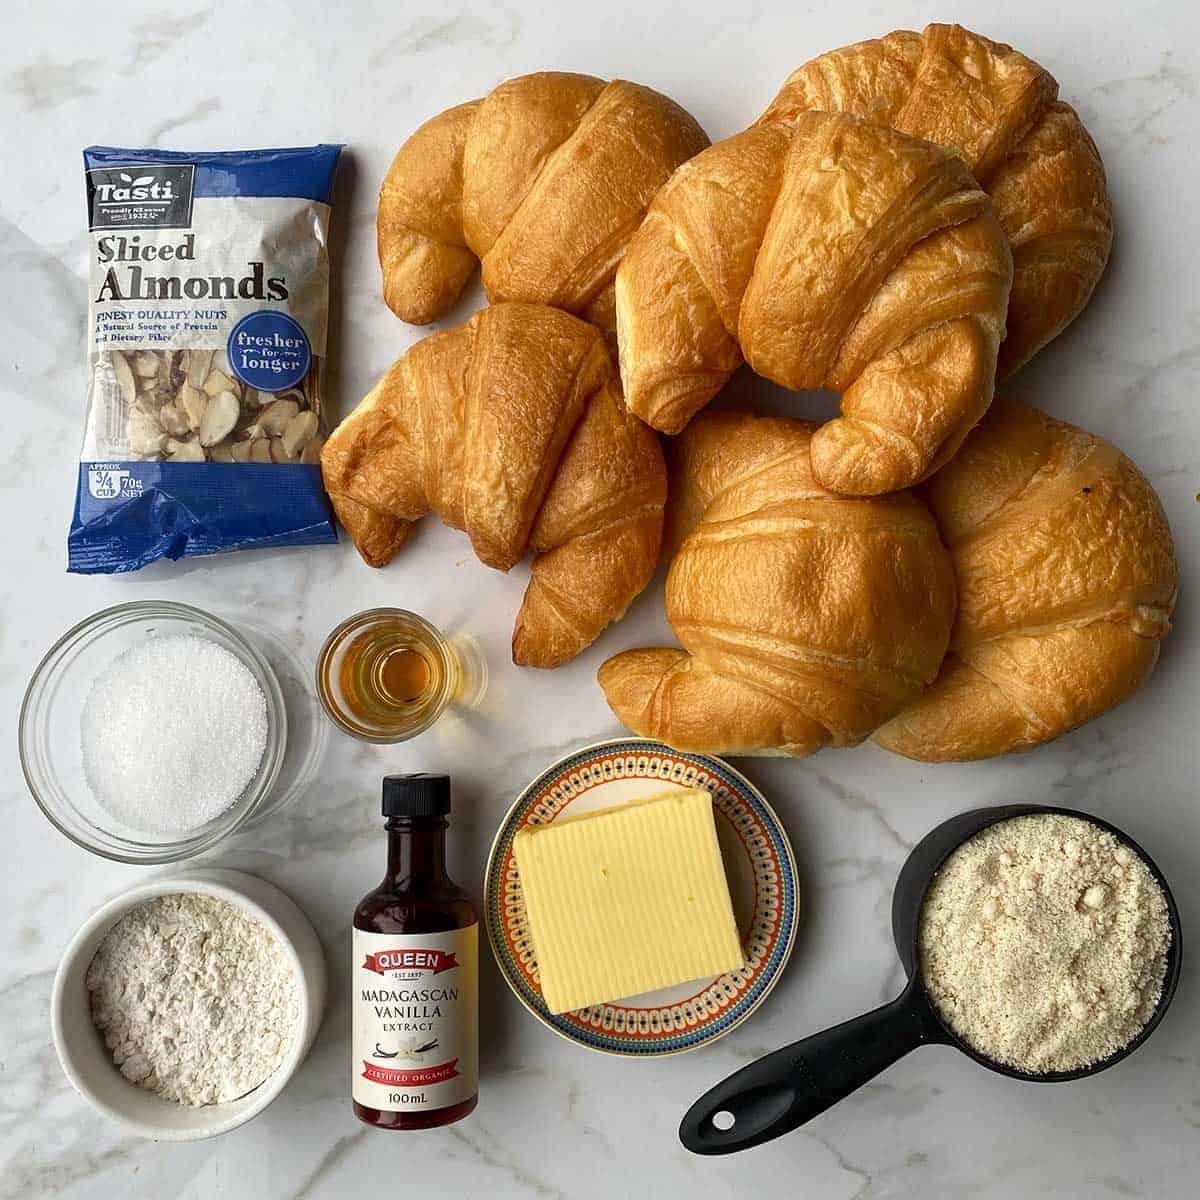 The ingredients for Almond Croissants on a white bench.